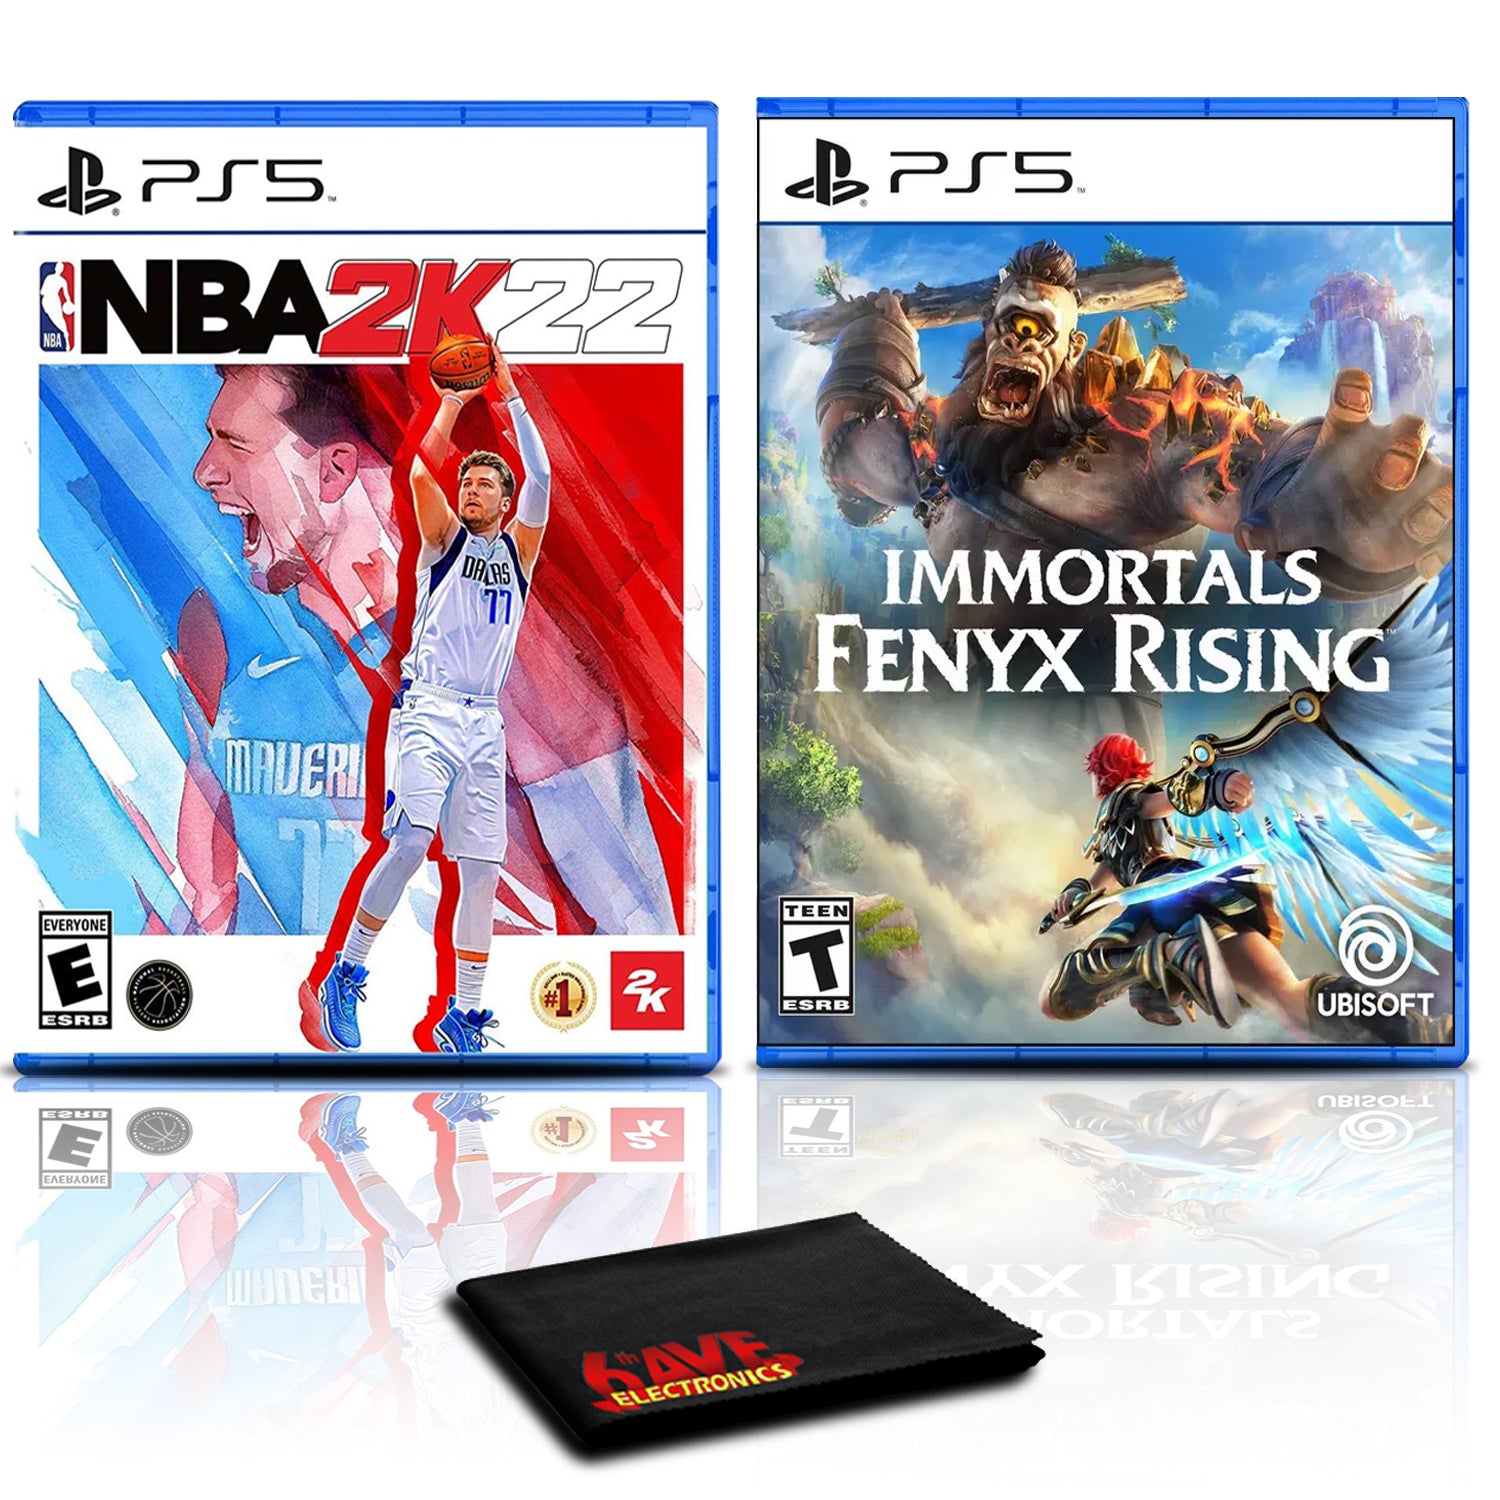 NBA 2K22 and Immortals Fenyx Rising - Two Games for PlayStation 5